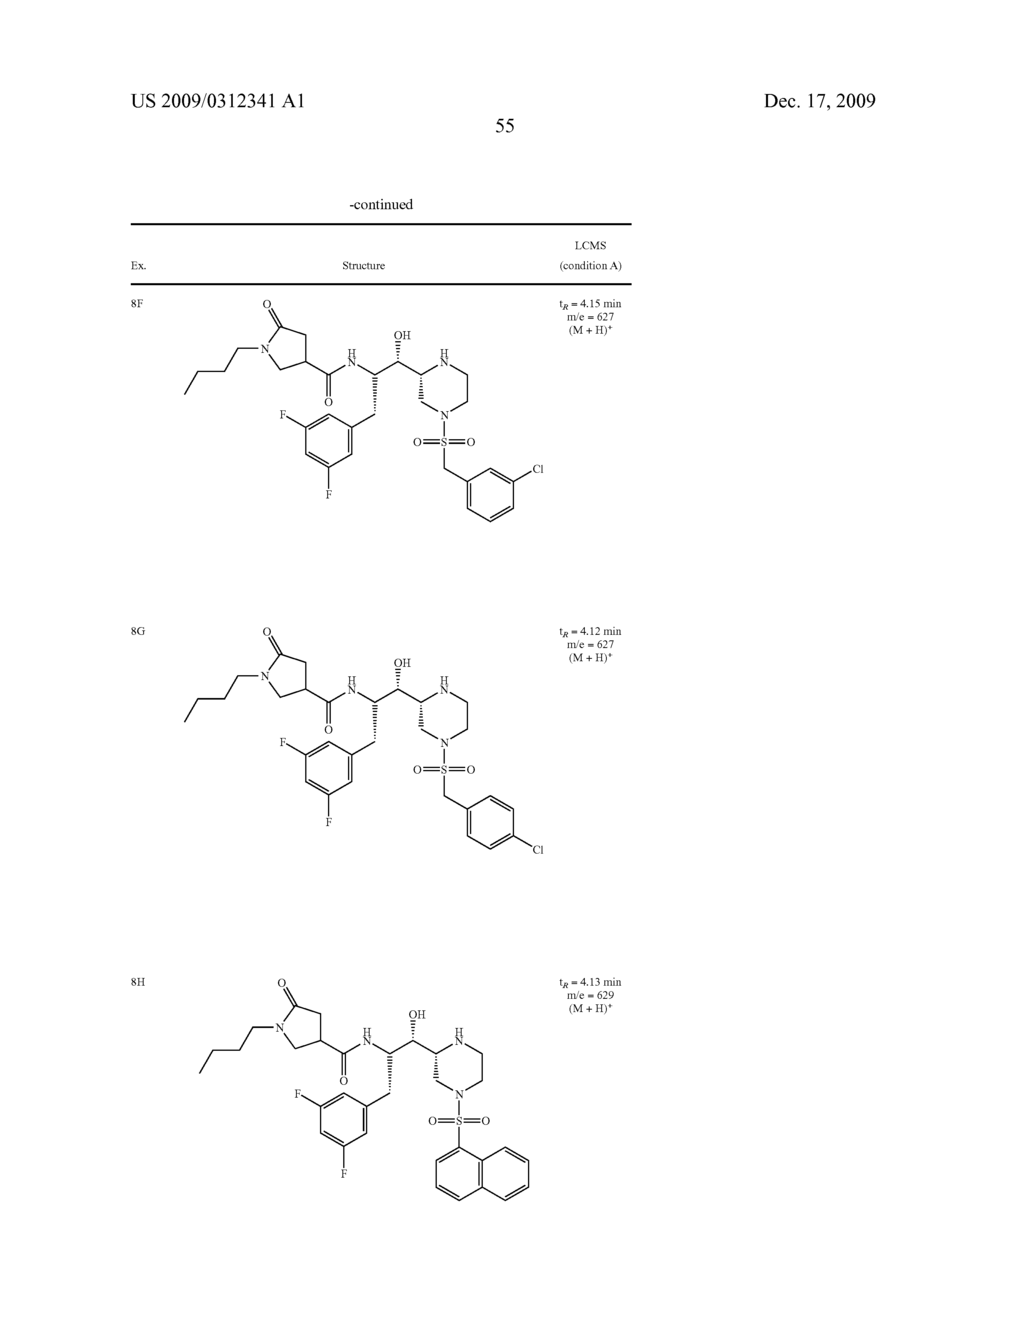 CYCLIC AMINE BACE-1 INHIBITORS HAVING A HETEROCYCLIC SUBSTITUENT - diagram, schematic, and image 56